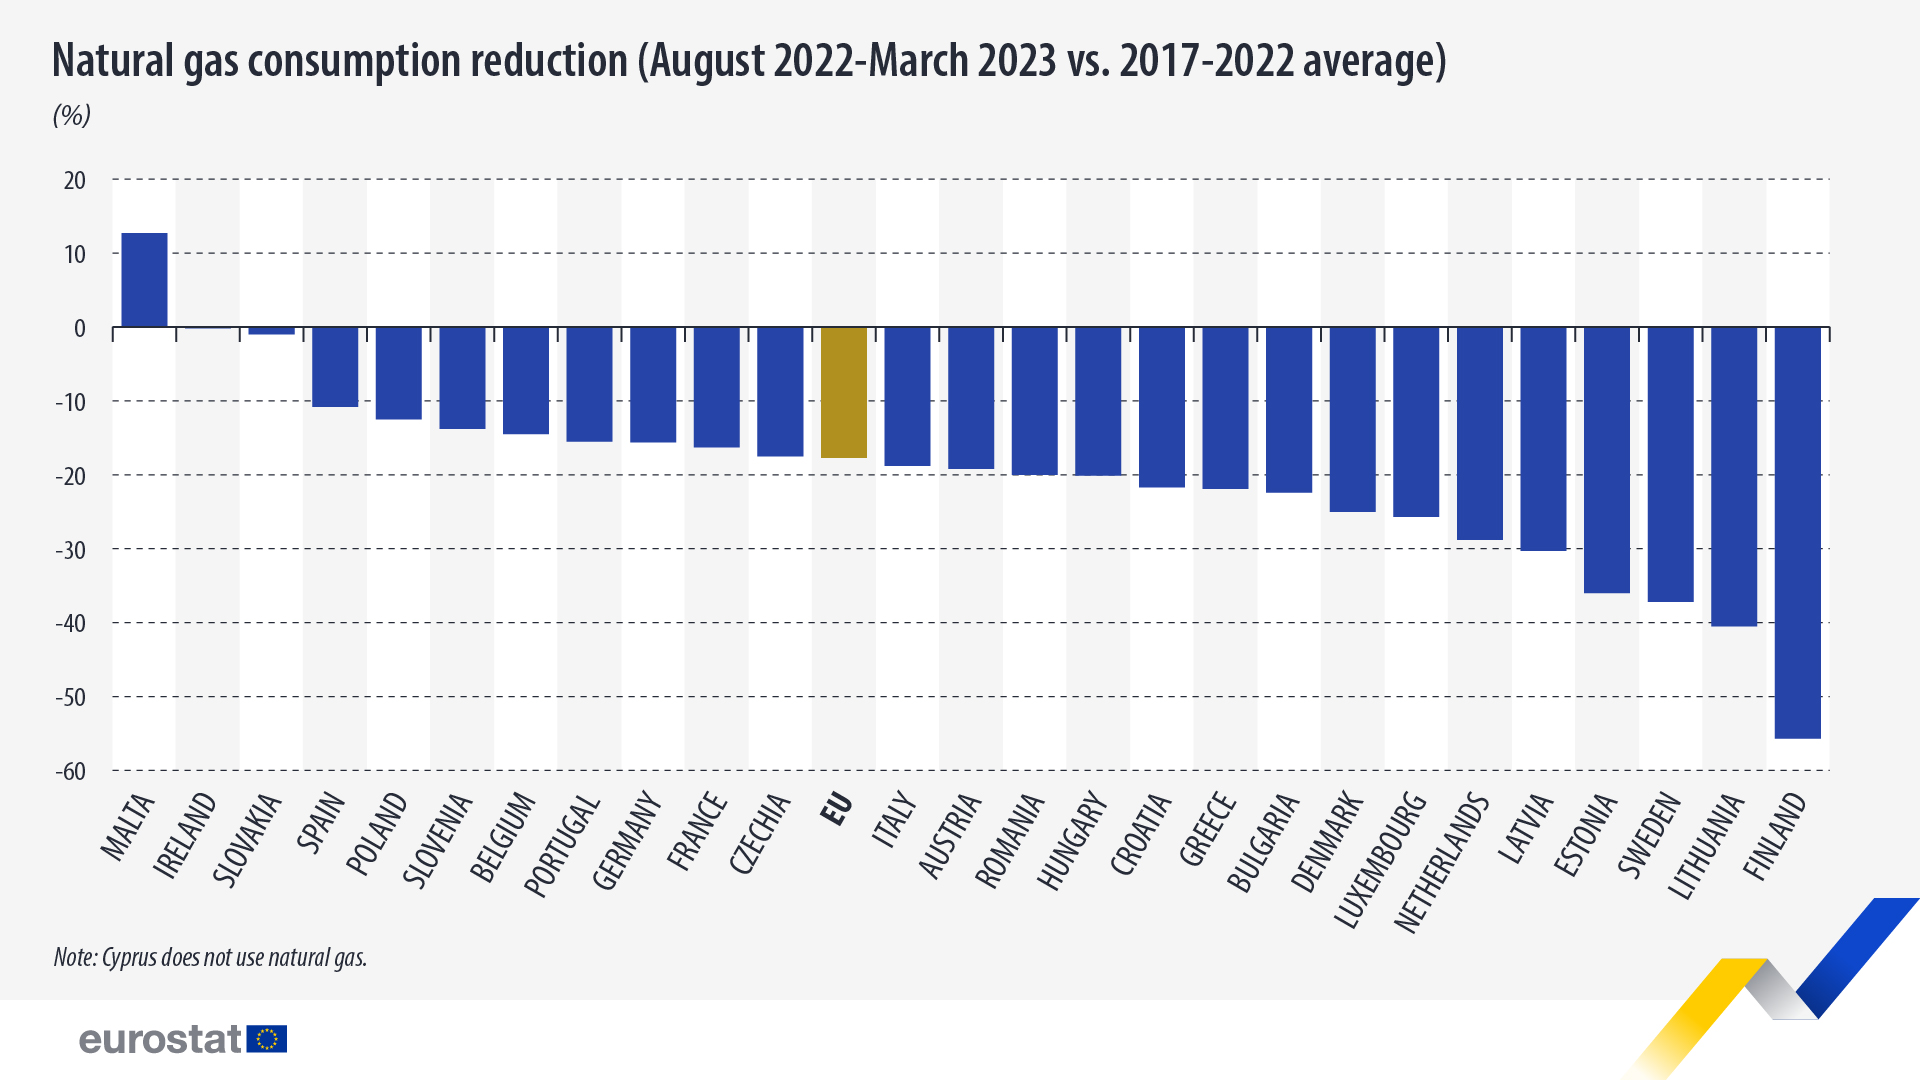 Bar chart: EU natural gas consumption reduction (August 2022- March 2023 vs 2017-2022 average; in %)